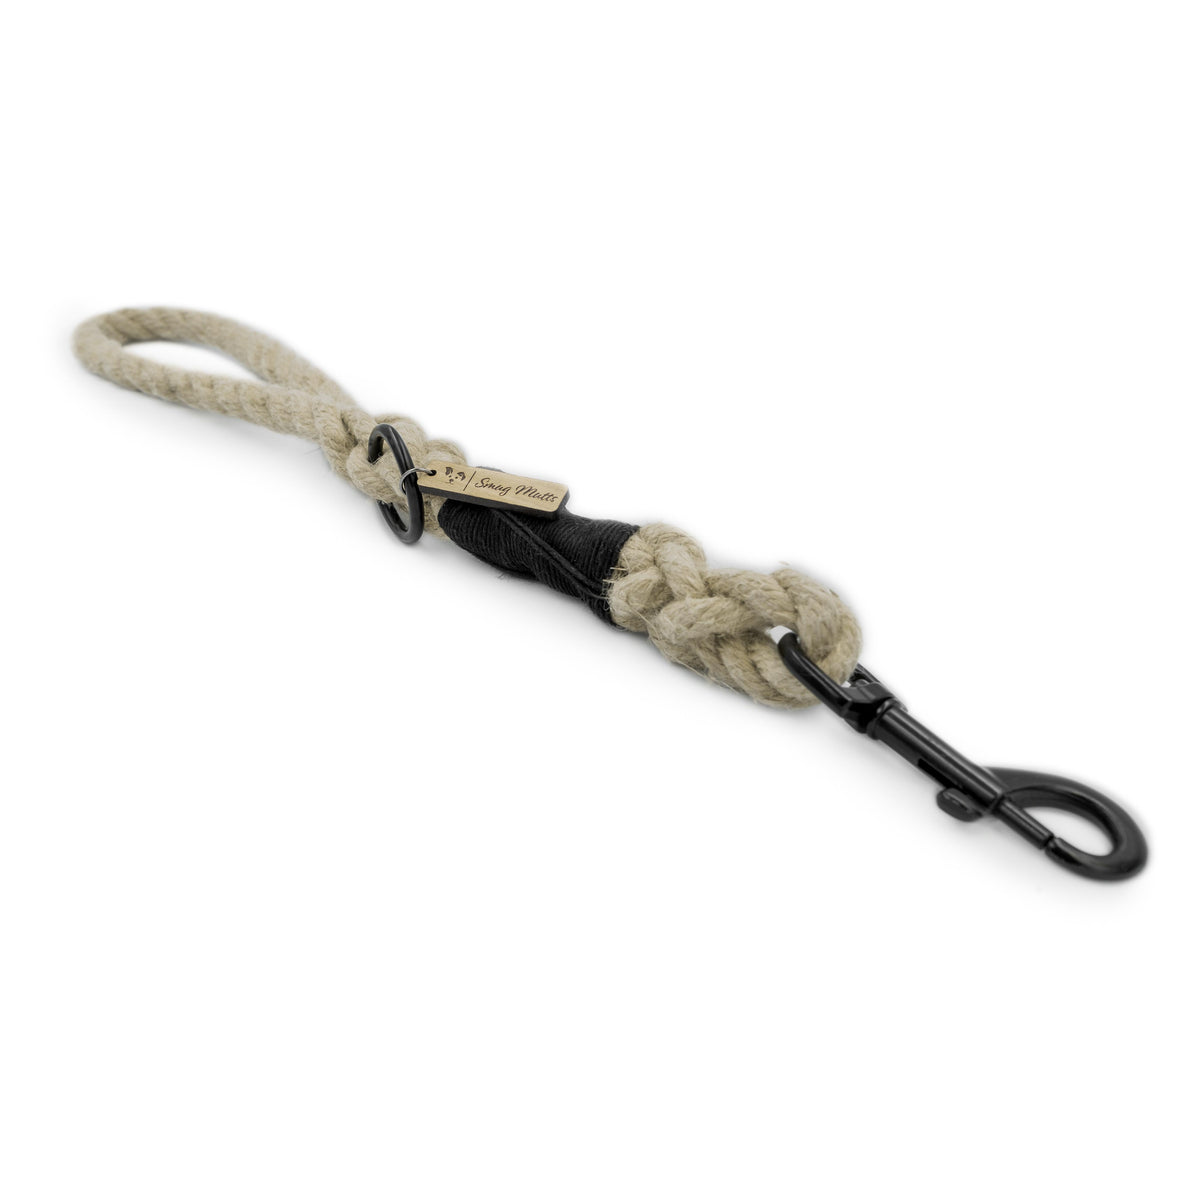 Smug Mutts Handmade, Organic, Natural Hemp Traffic Lead with Black Whipping, Black Spring Snap Clip and a Black O-Ring, Natural and Eco Friendly Dog Lead